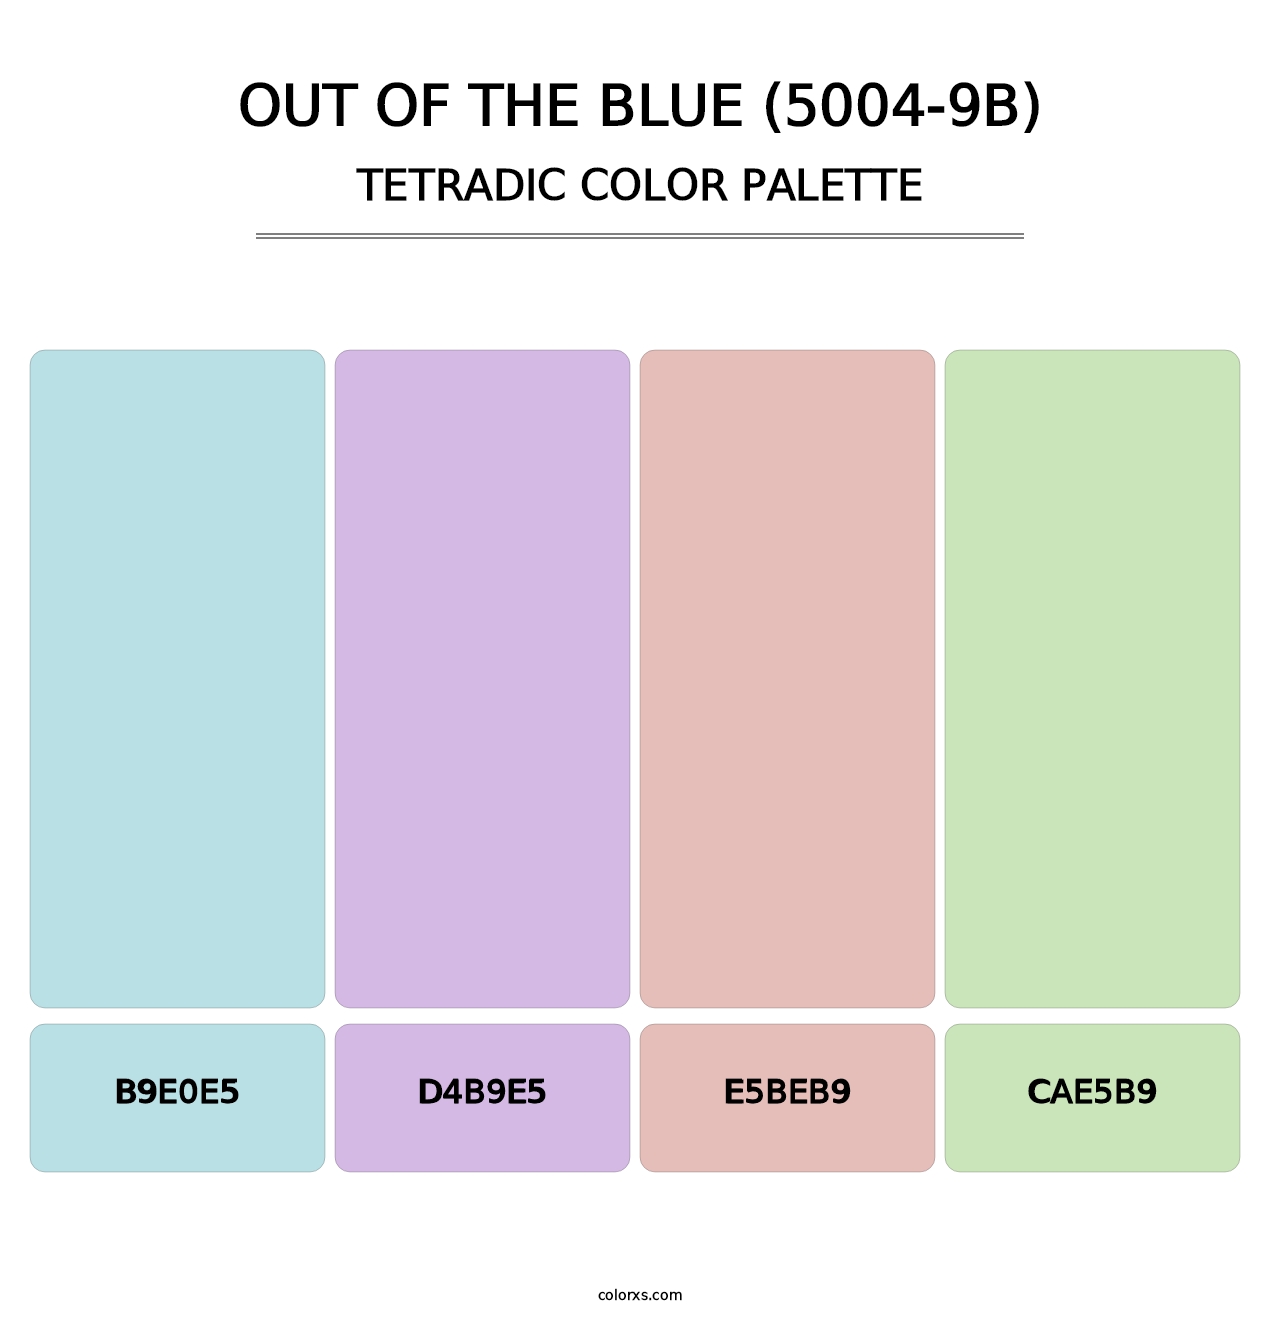 Out of the Blue (5004-9B) - Tetradic Color Palette